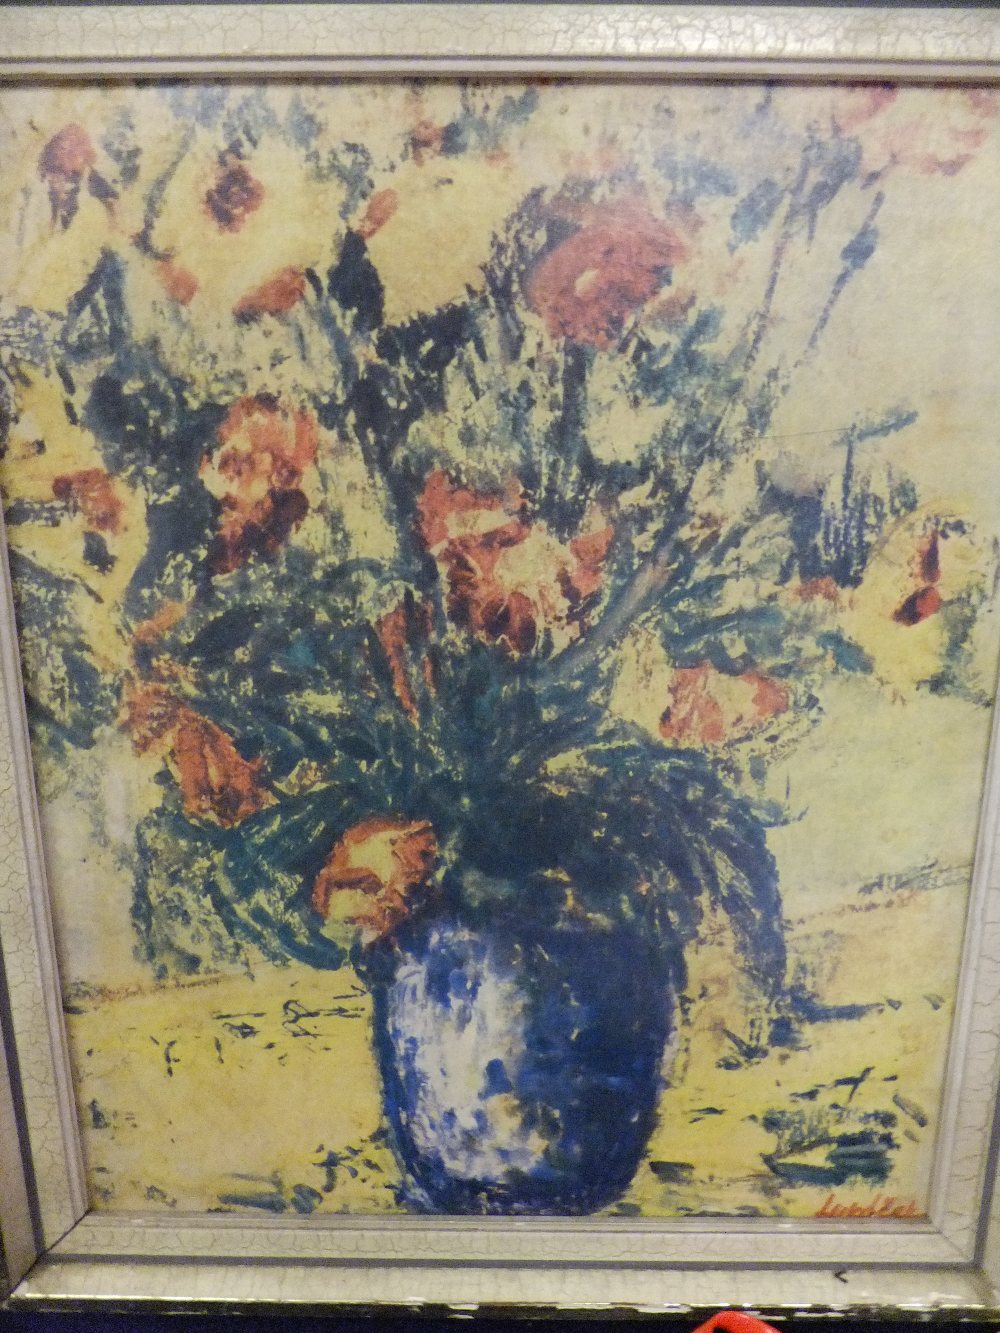 A vintage print of a still life study of flowers, framed